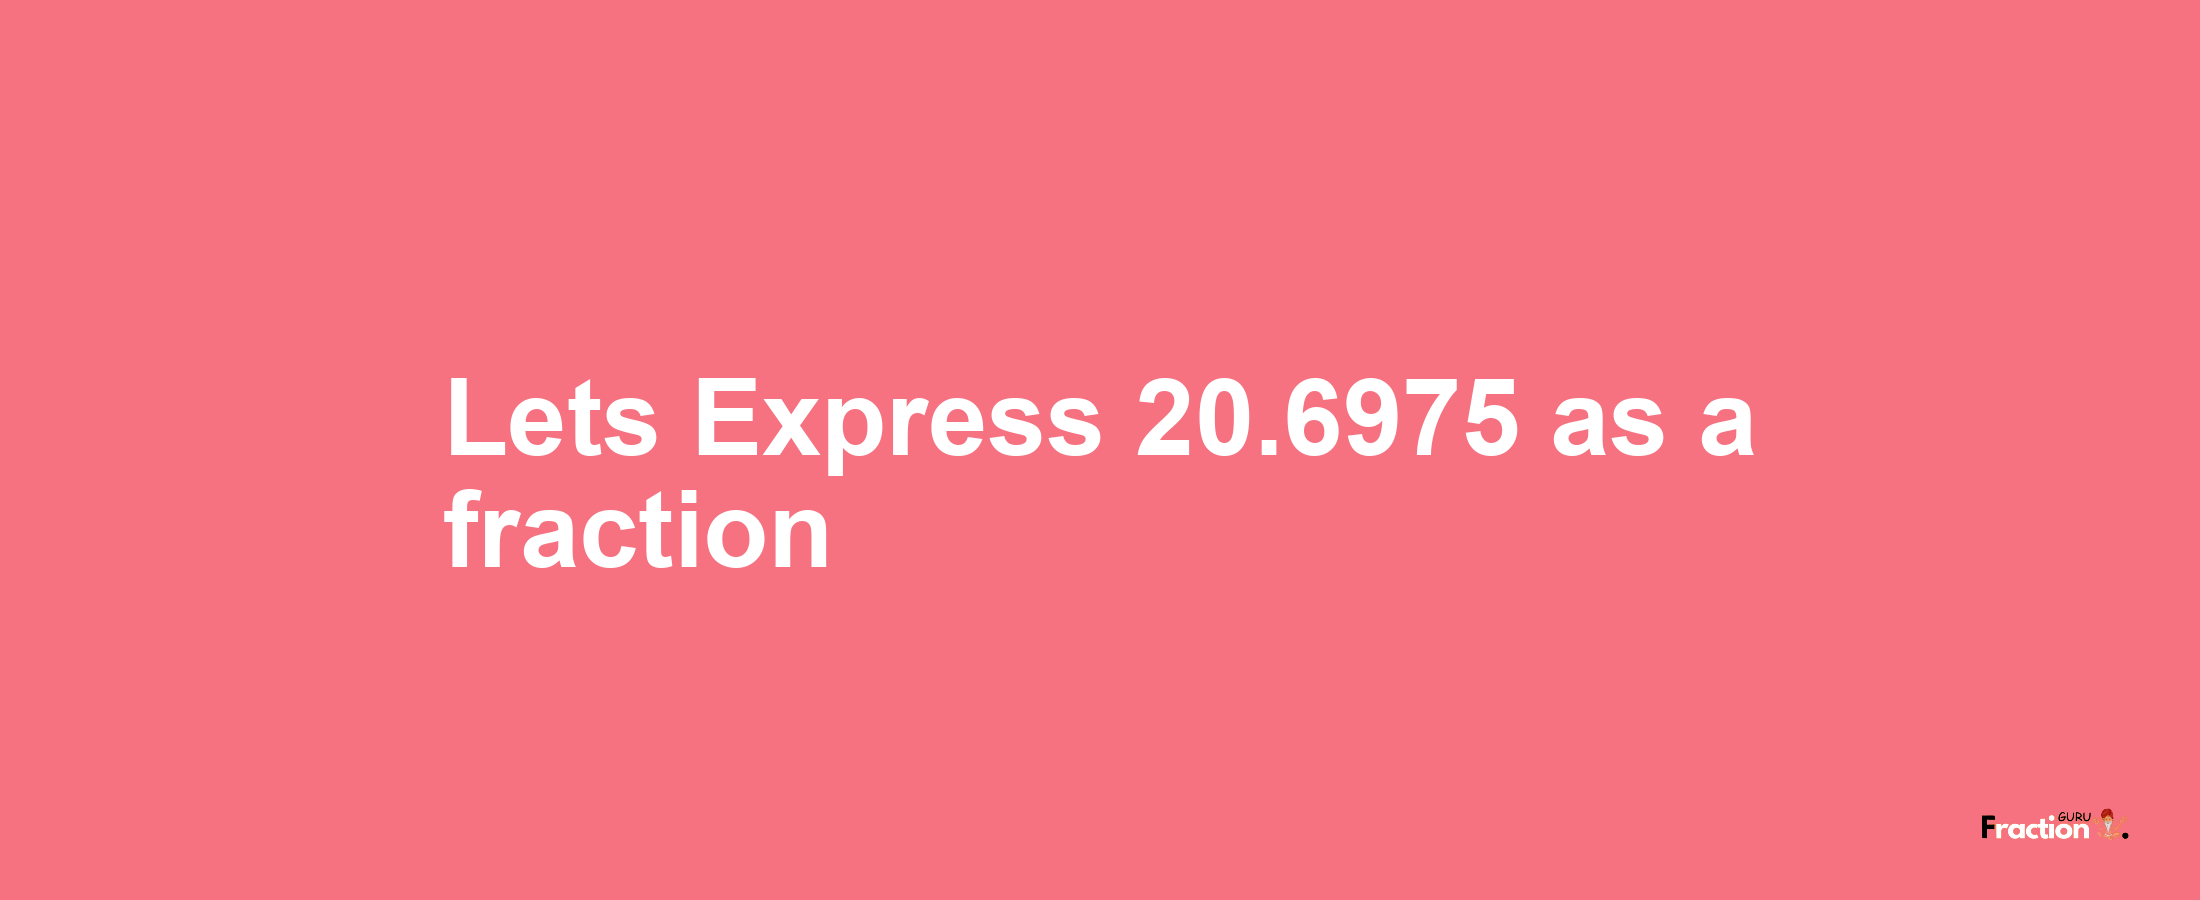 Lets Express 20.6975 as afraction